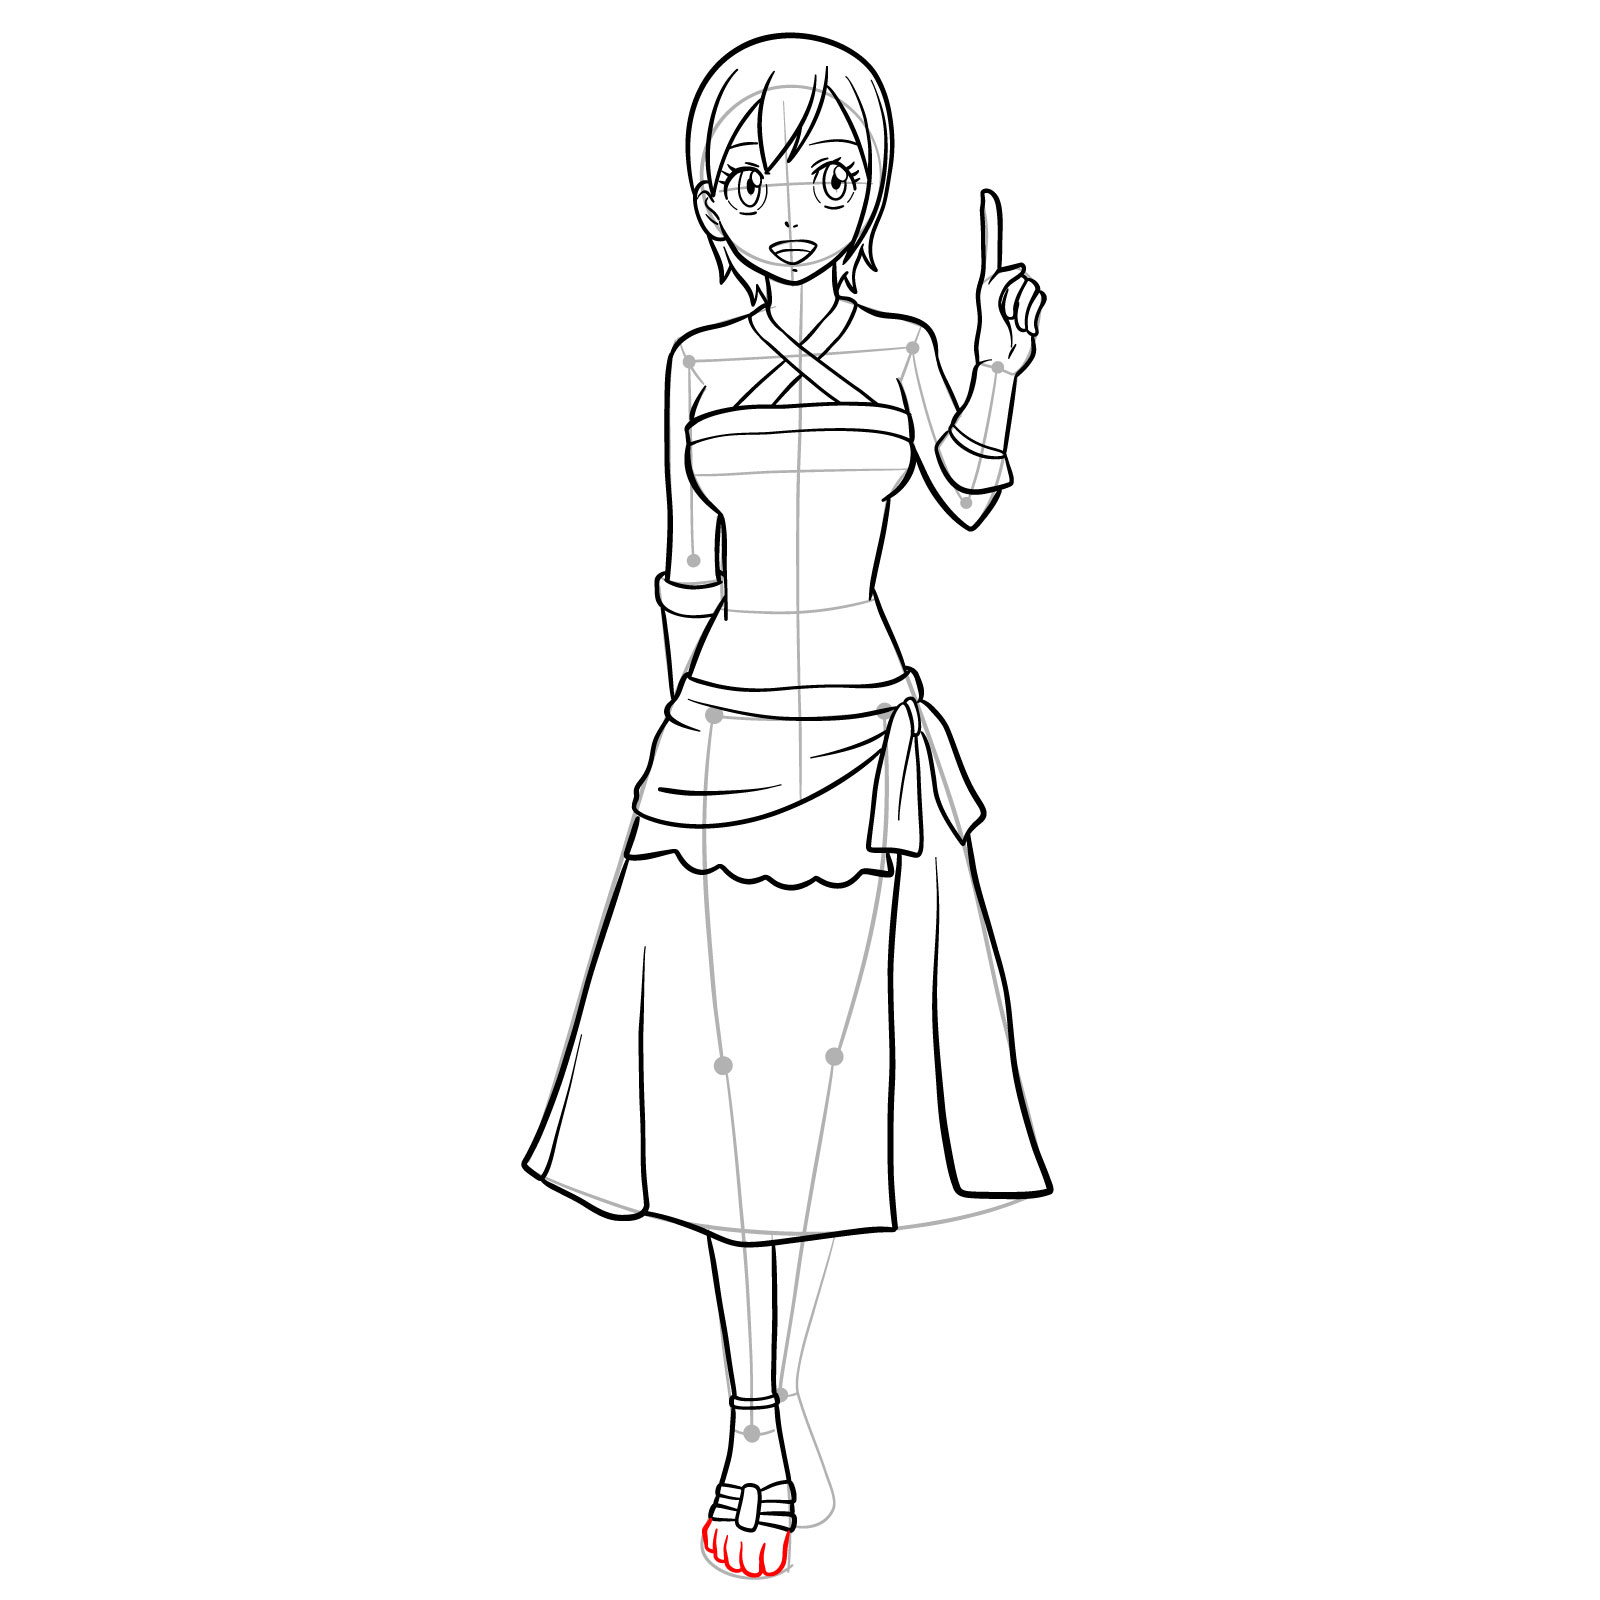 How to draw Lisanna Strauss from Fairy Tail - step 31